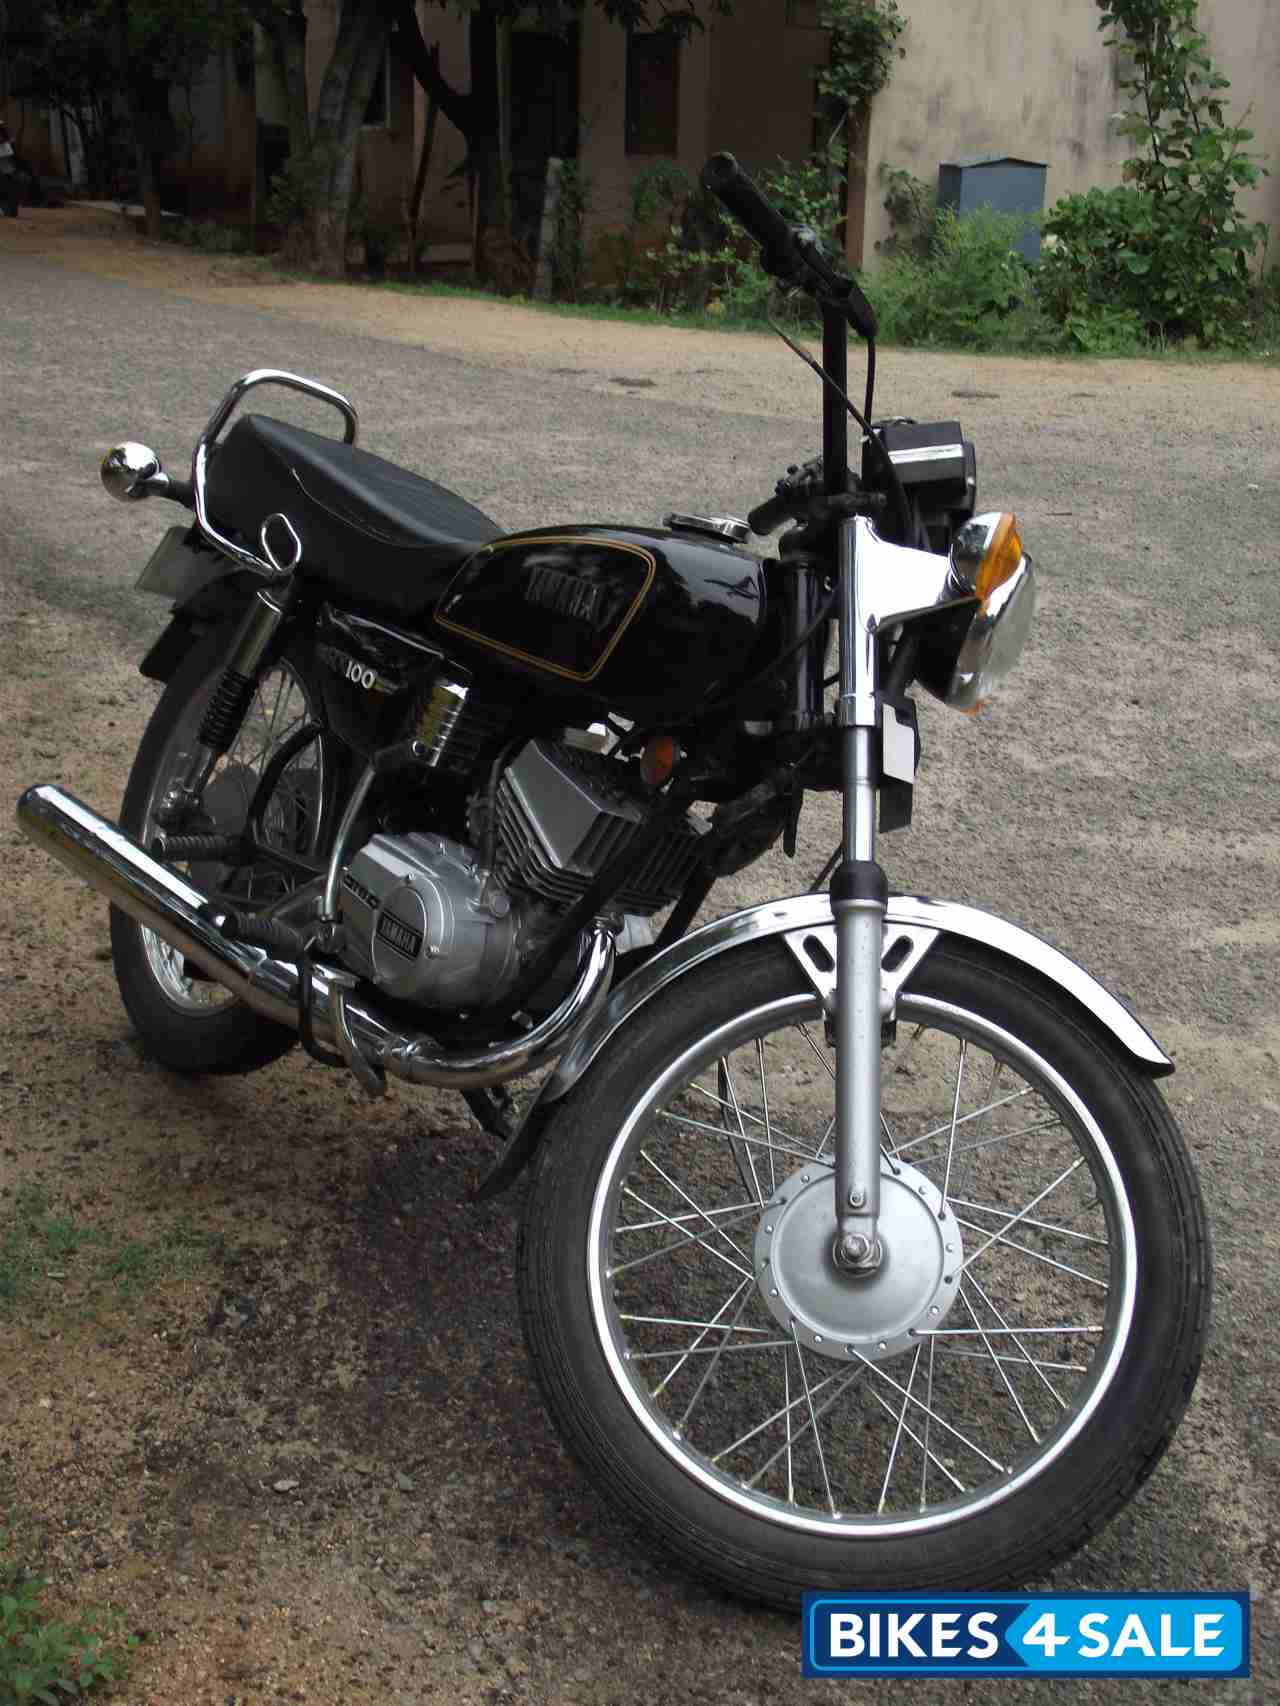 Used 1992 Model Yamaha Rx 100 For Sale In Hyderabad Id Black Colour Bikes4sale